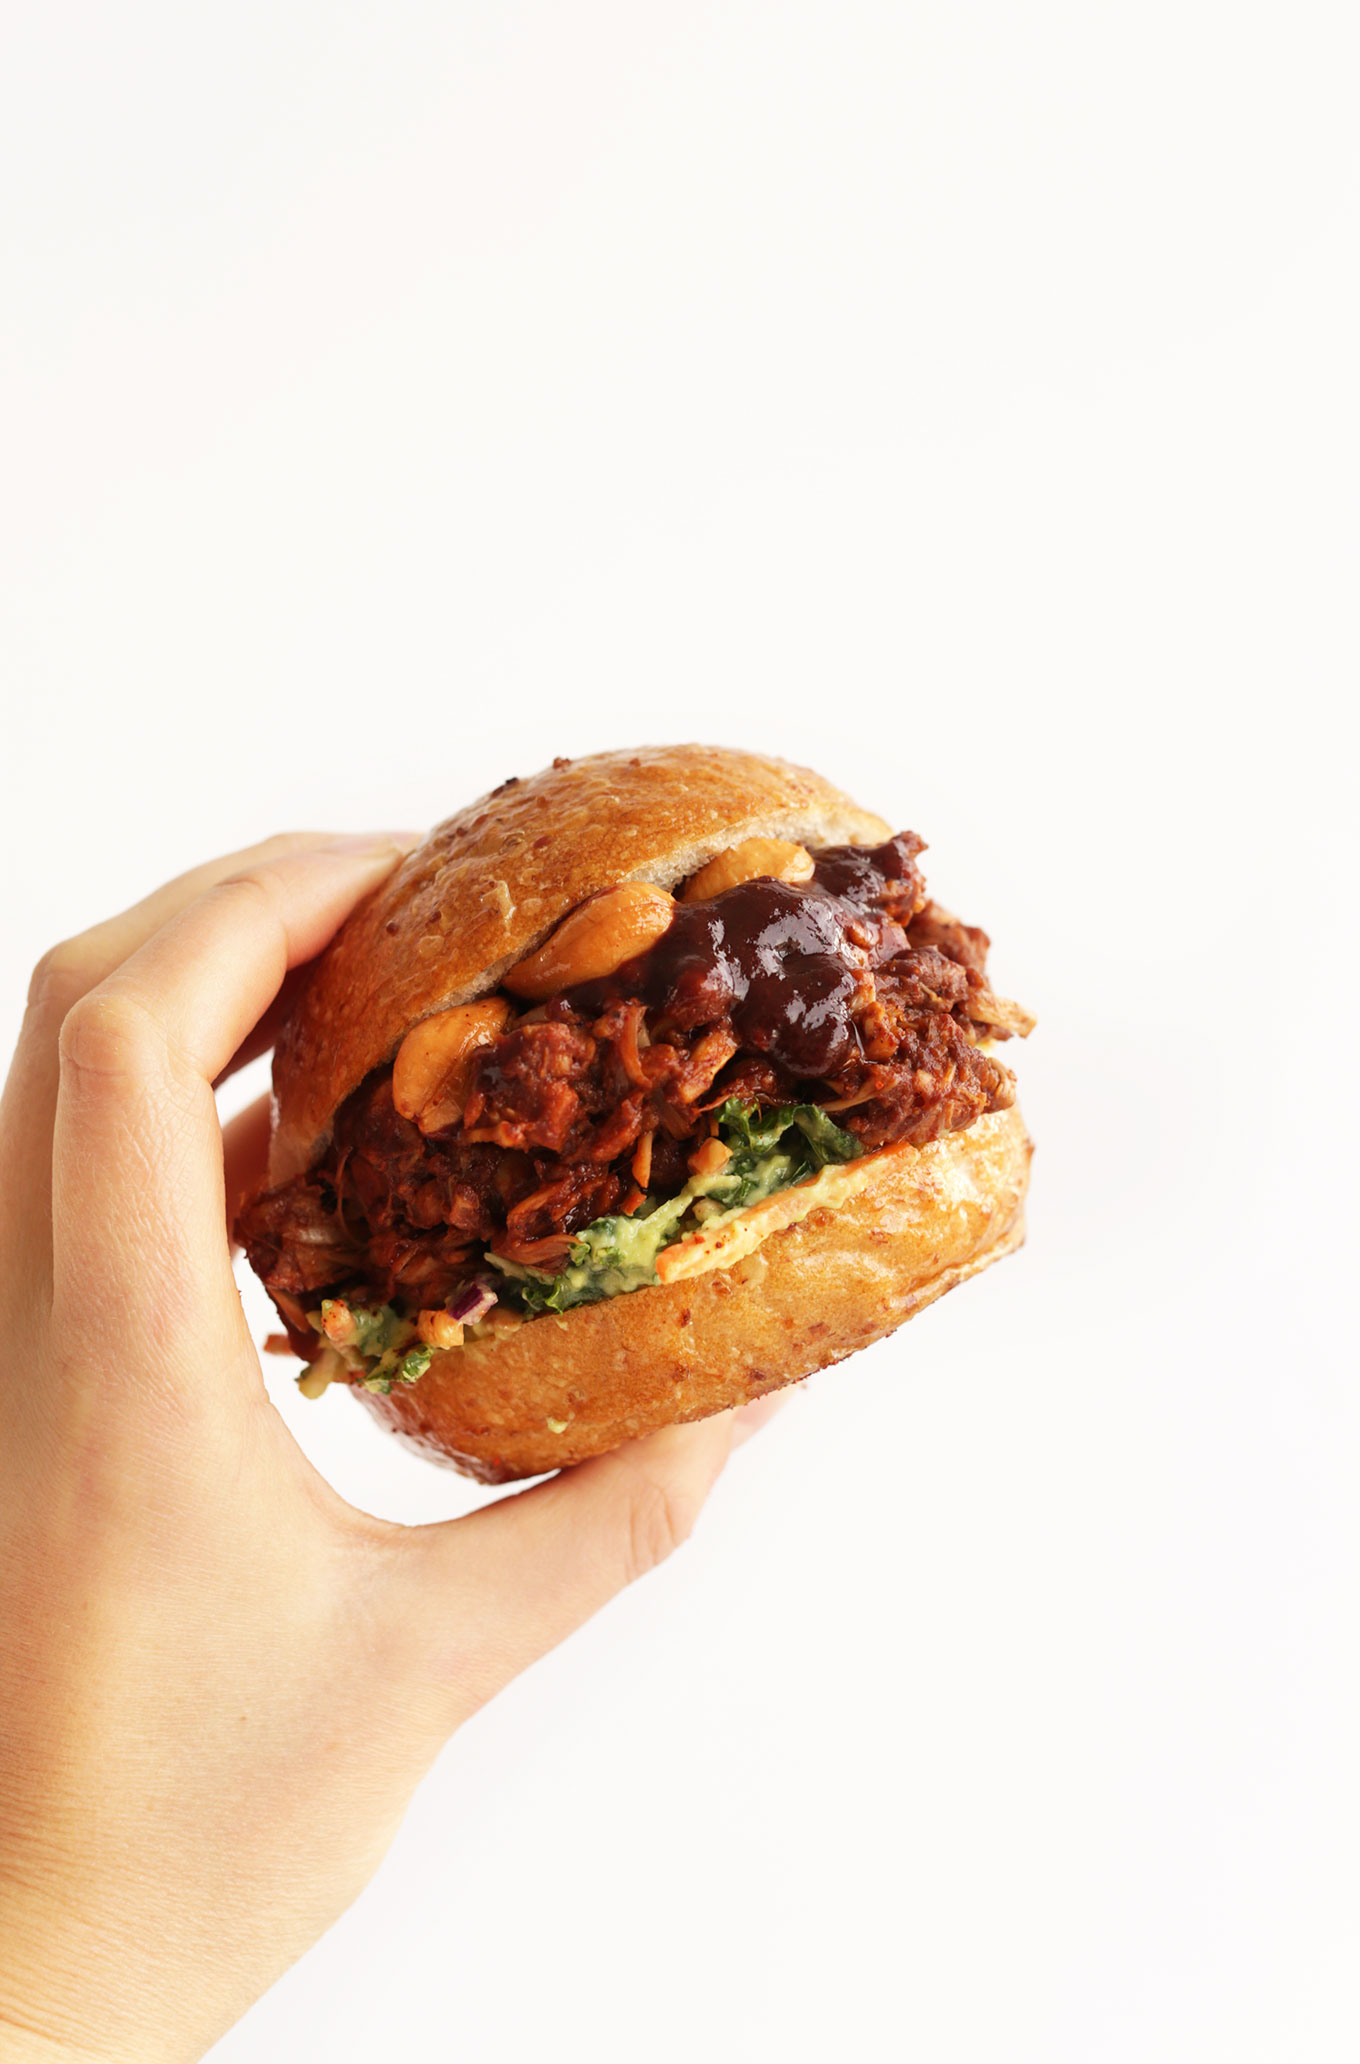 Holding up an amazing BBQ Jackfruit Sandwich topped with Avocado Slaw and Roasted Cashews